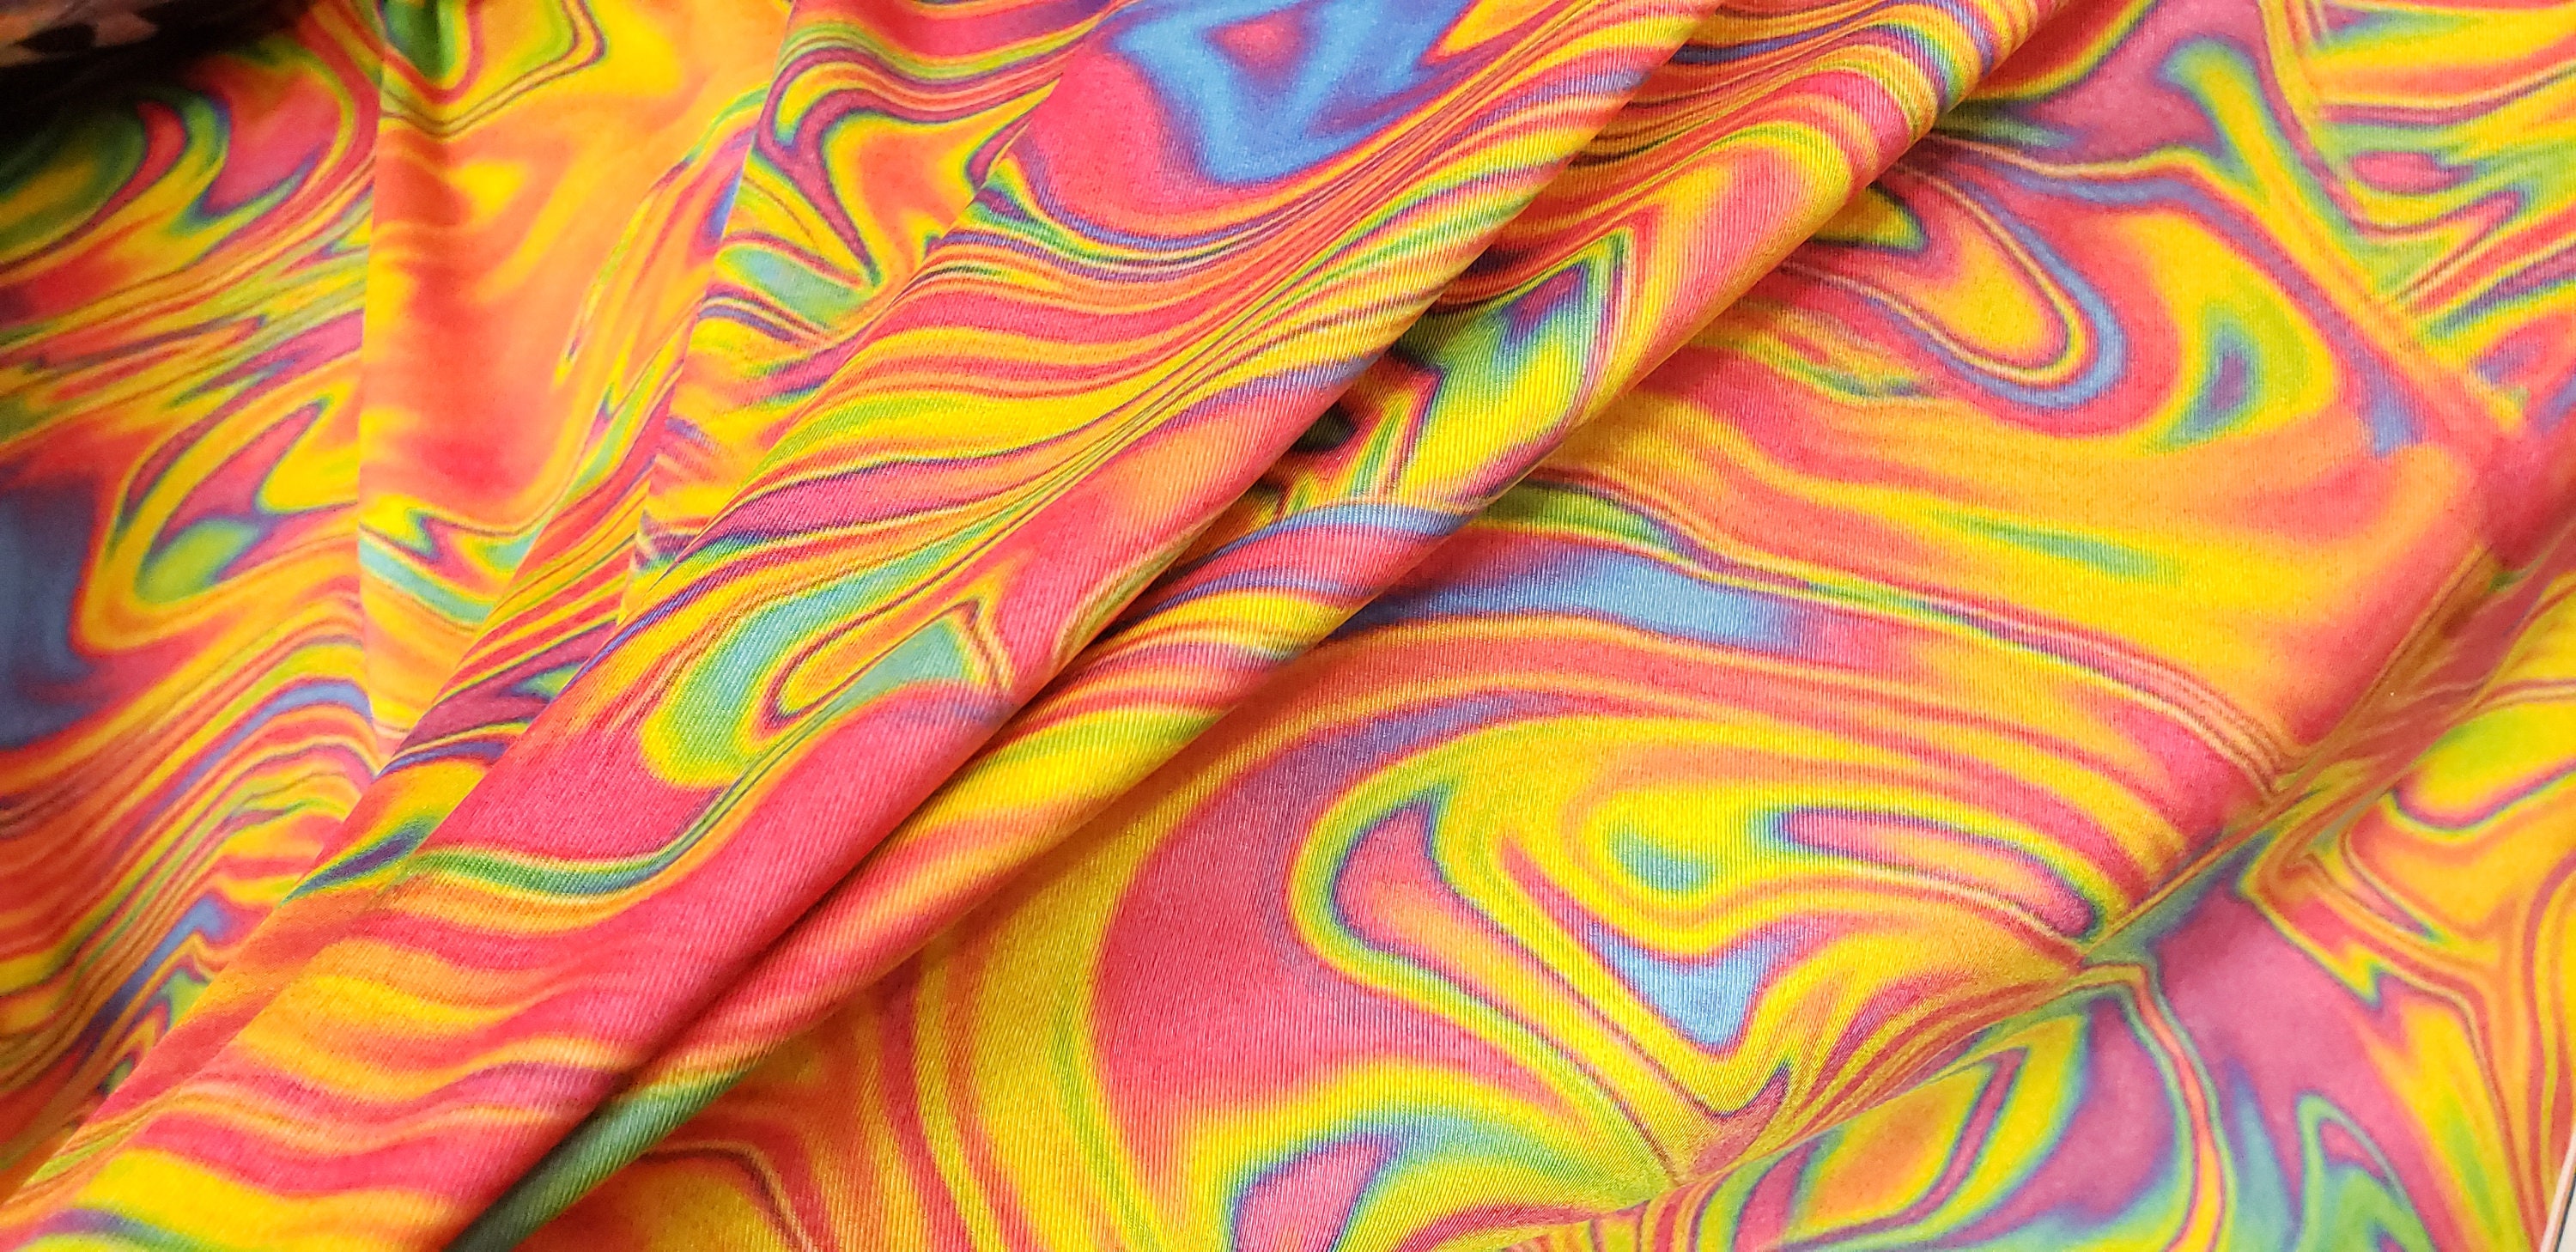 MADE IN USA Nylon 4 Way Stretch Poly Spandex Groovy 60s - Etsy